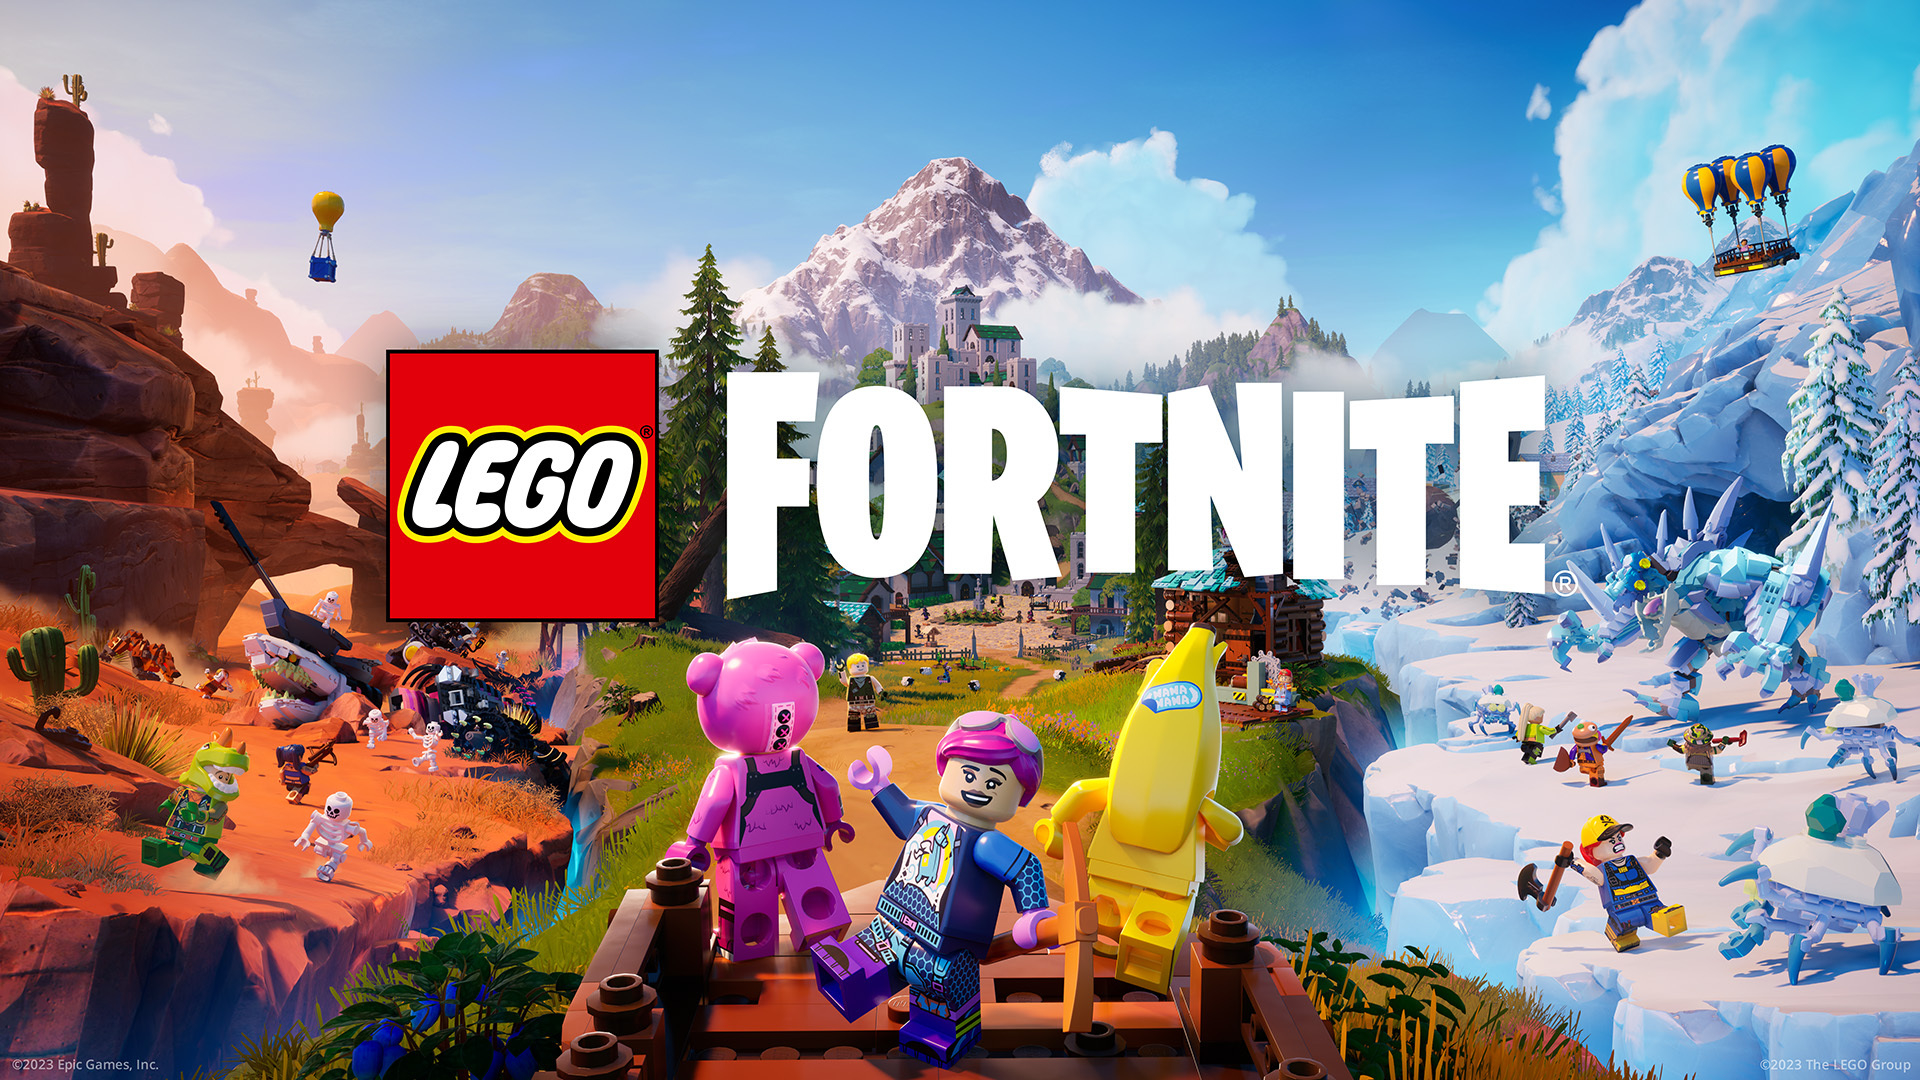 Fortnite' adds 1200 Lego skins and new survival crafting mode